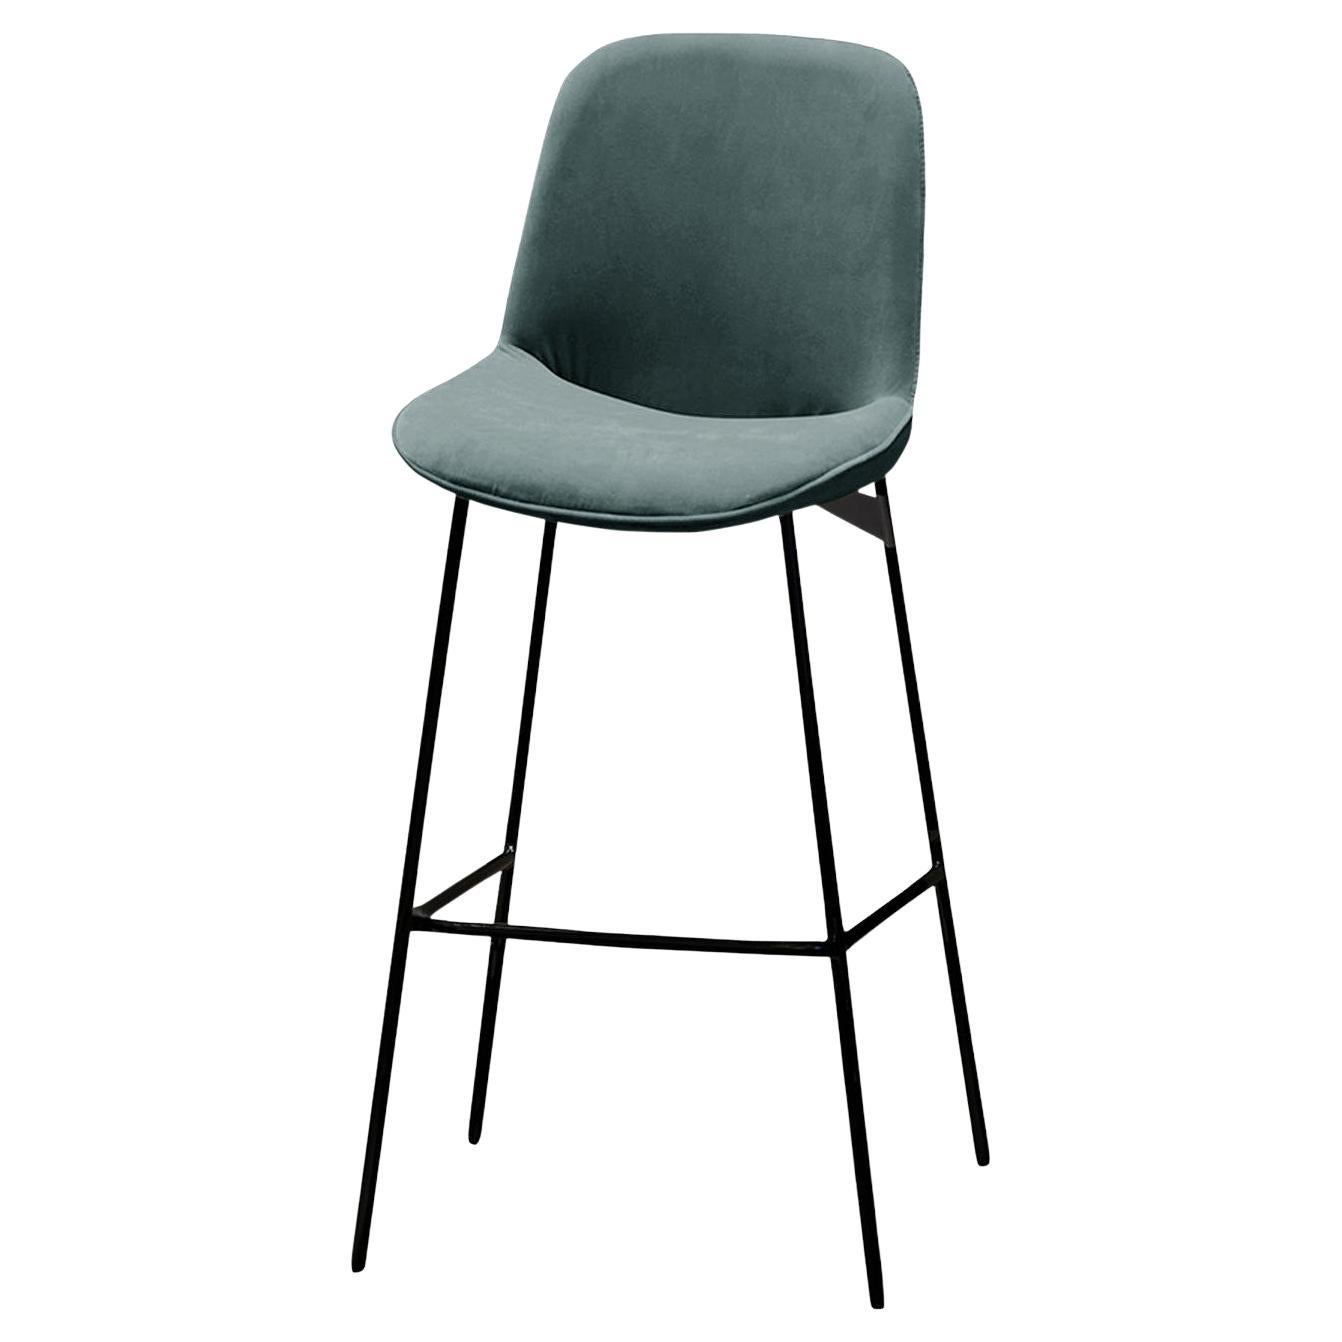 Chiado Bar Stool, Eucalyptus Leather with Teal and Black